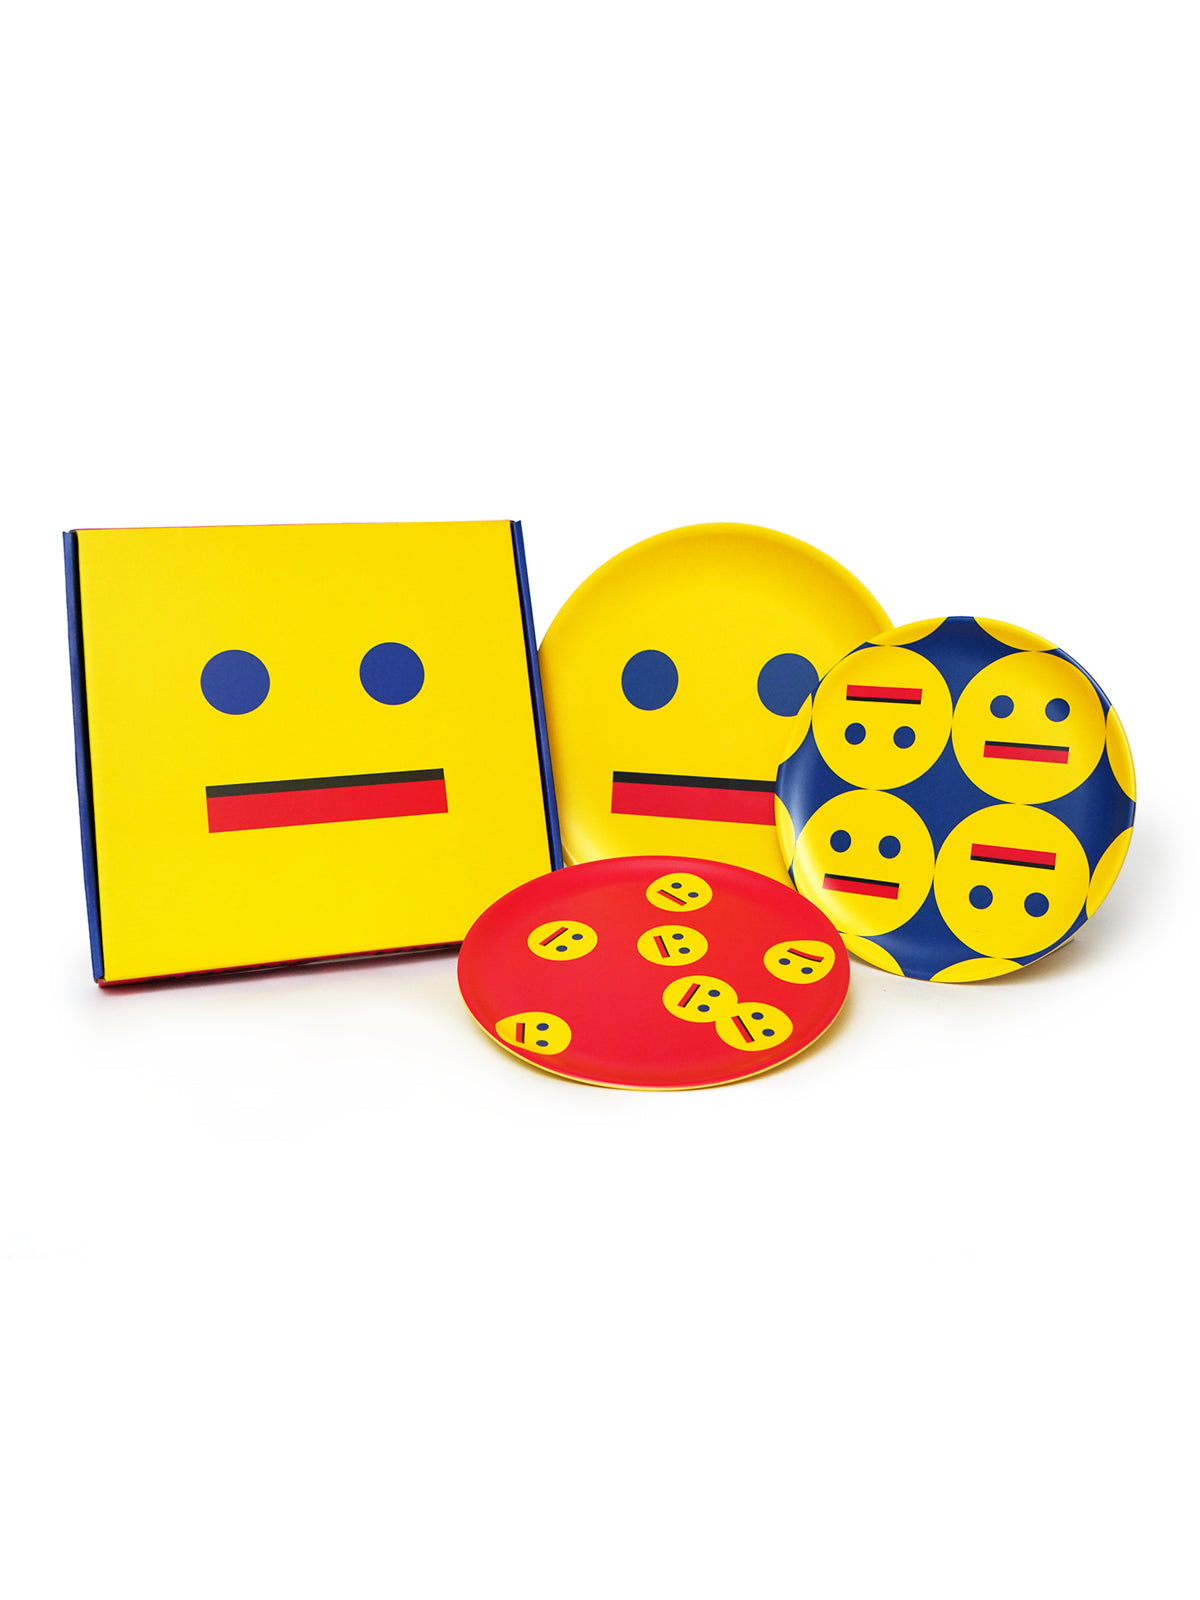 [SMILEY by ANGUS CHIANG] BAMBOO FIBER PLATE SET